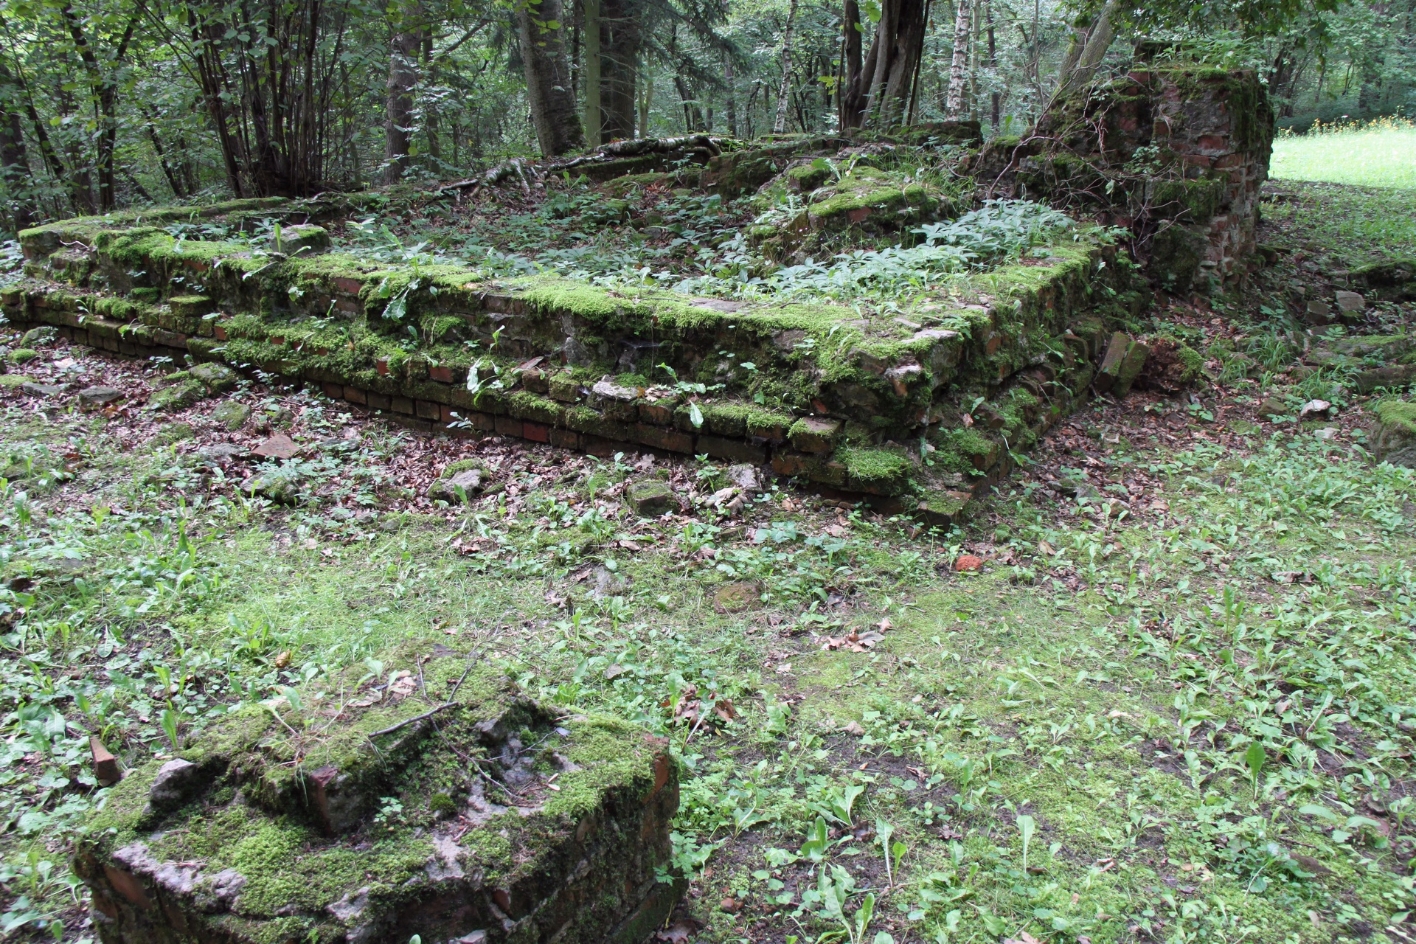 Moss-covered foundation wall remains surrounded by trees.